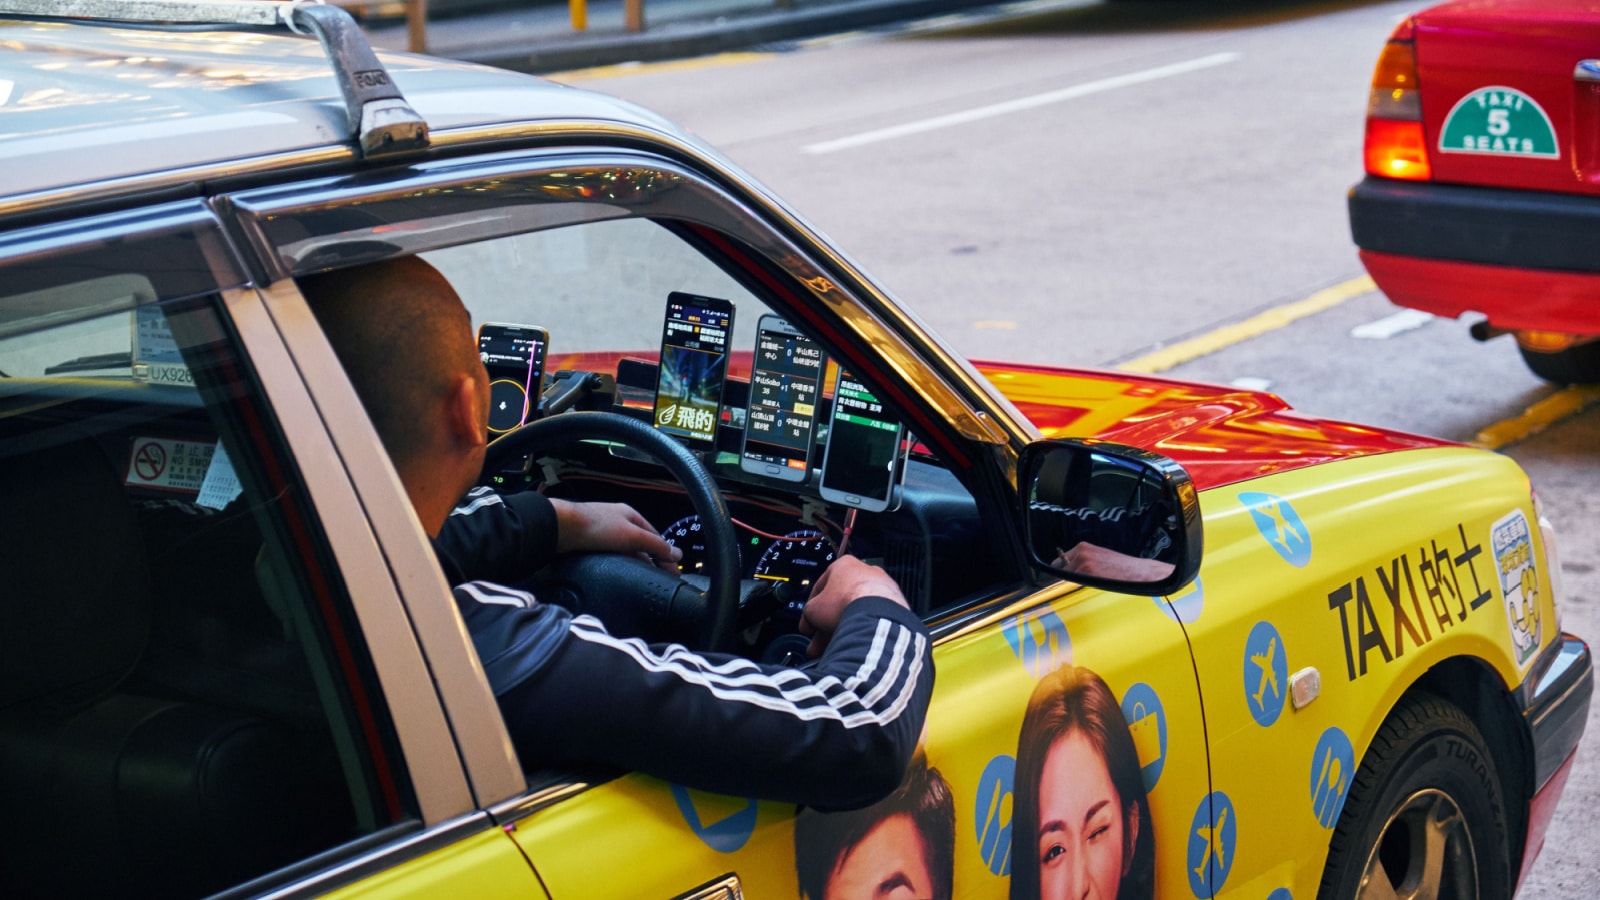 HONG KONG - JANUARY 2, 2019: Taxi driver with four smartphones